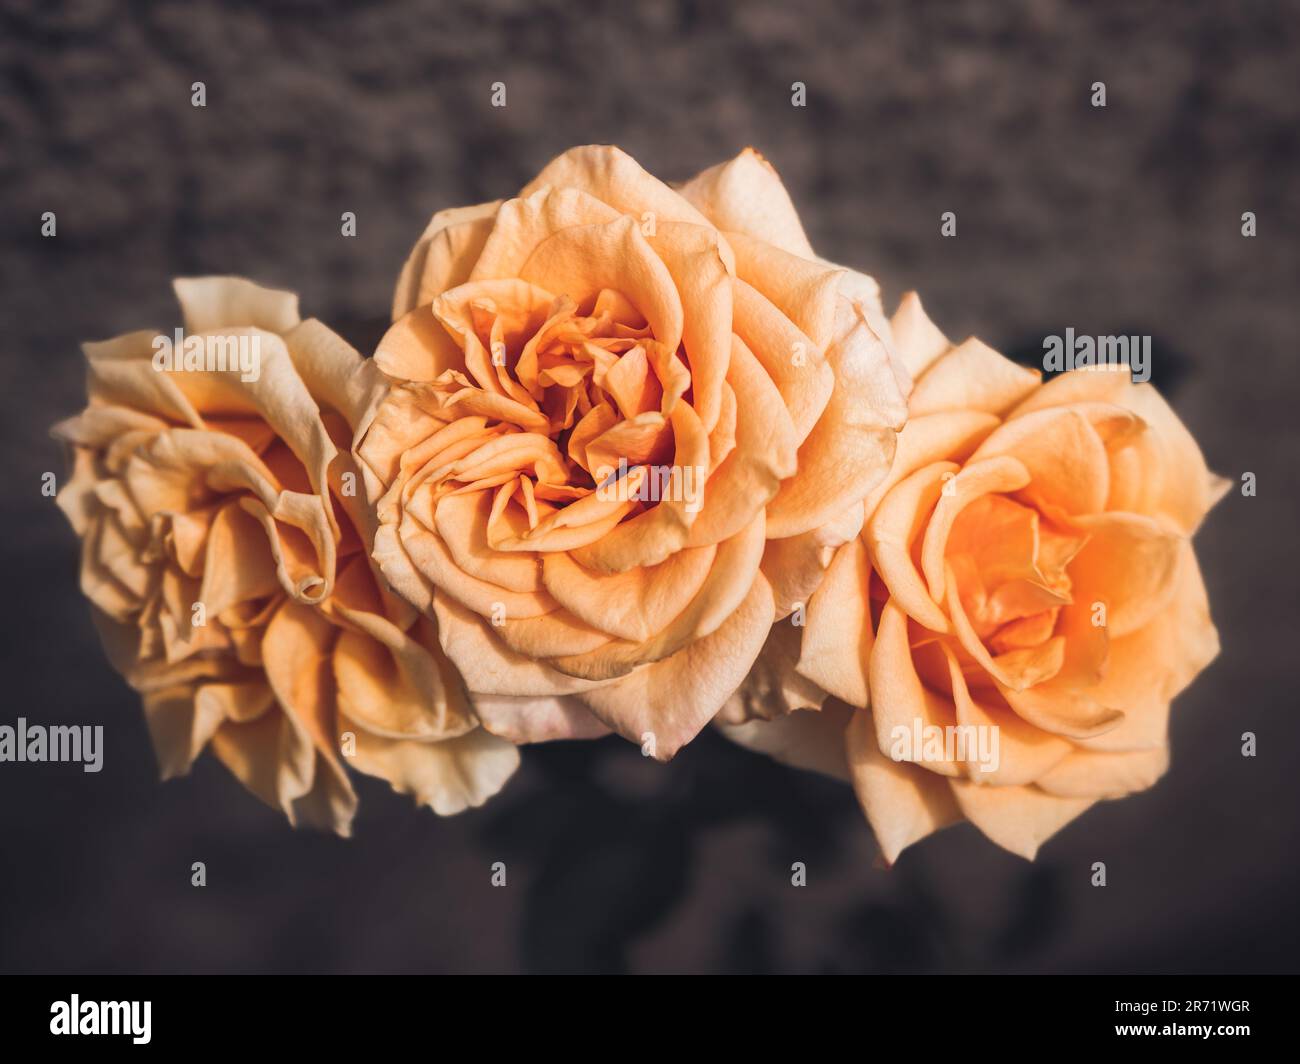 Close-up of orange roses in full bloom isolated against a moody dark background. Flowers with shallow depth of field with soft focus and vignette Stock Photo